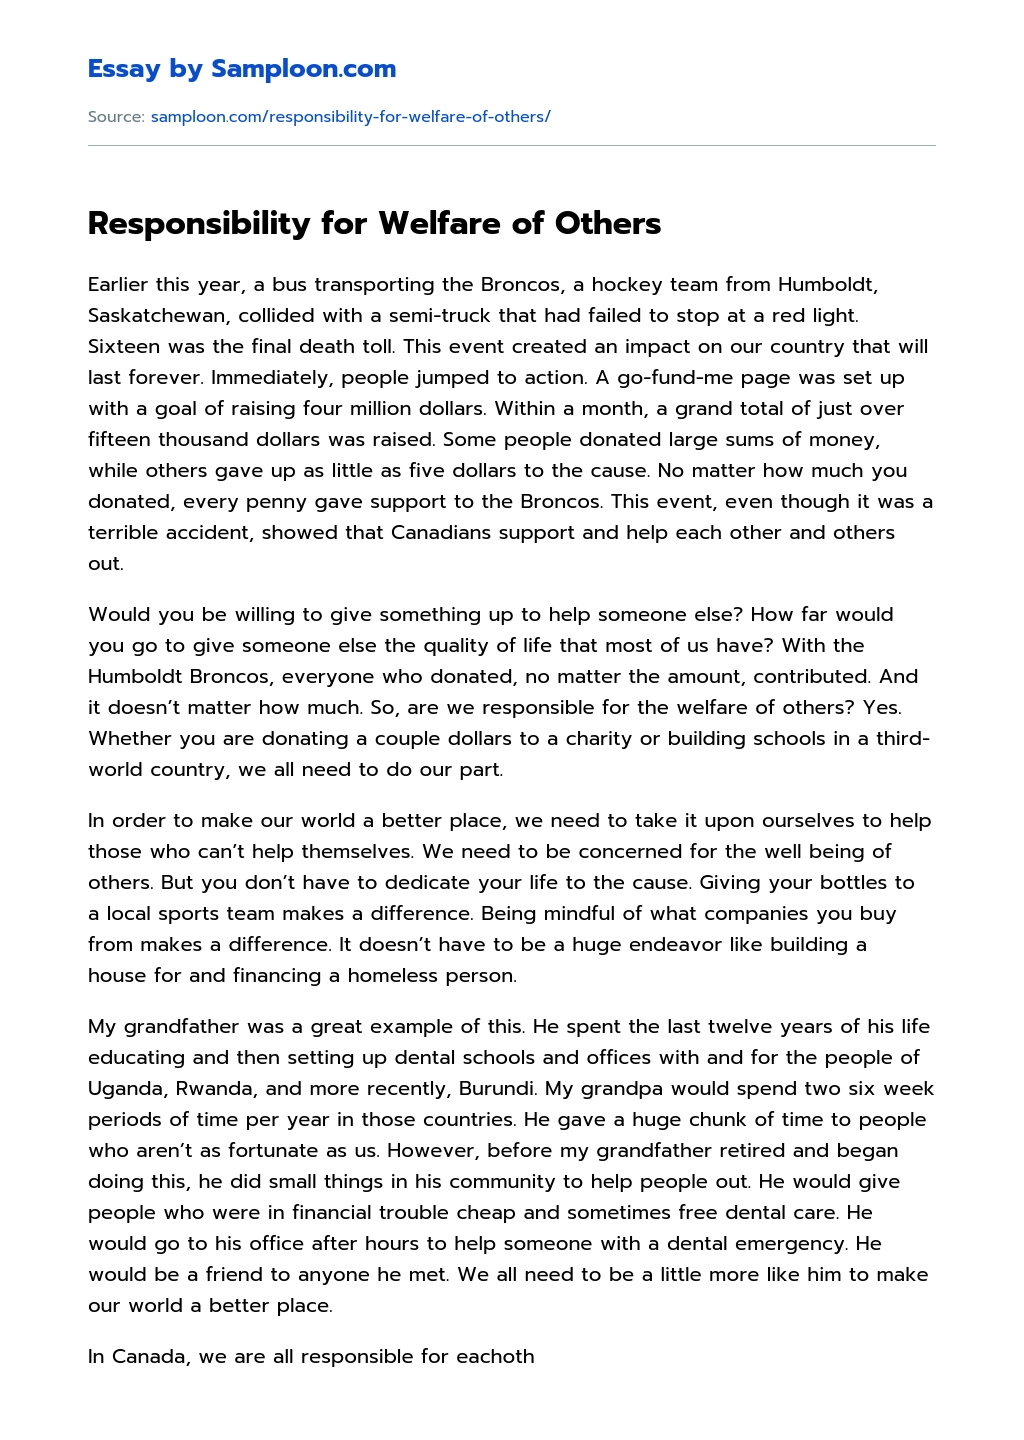 Responsibility for Welfare of Others essay